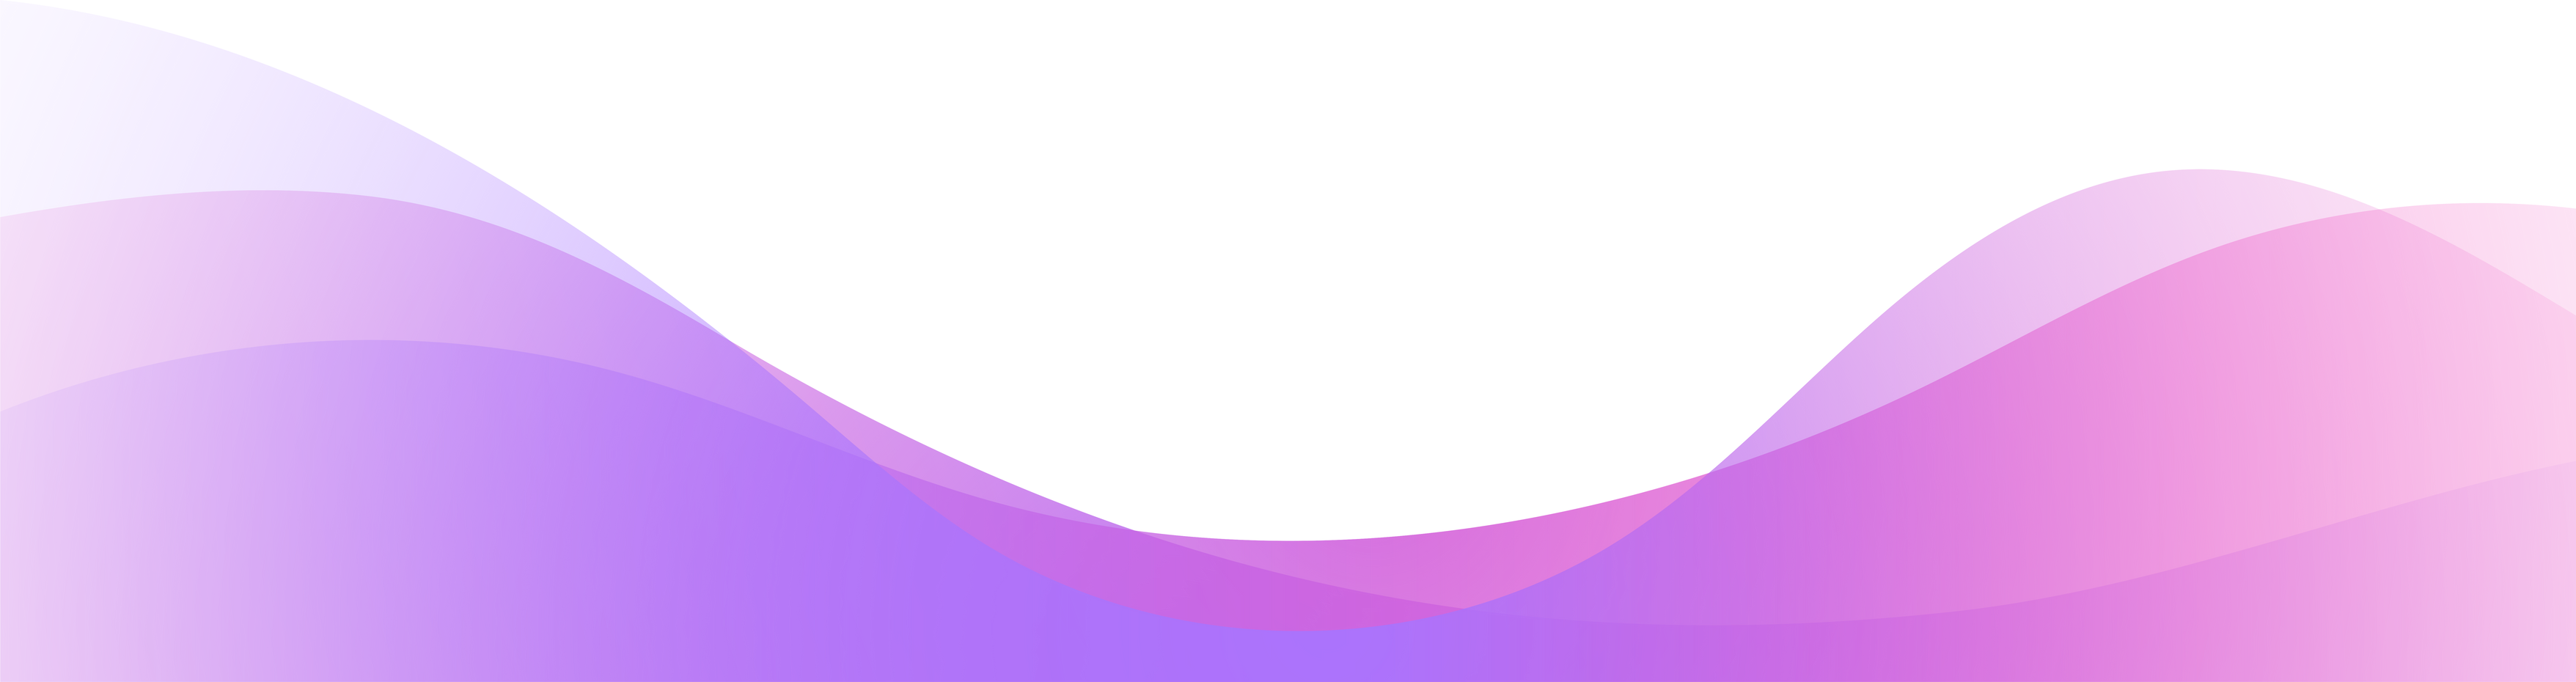 Purple Wave Abstract Transparent Gradient Footer